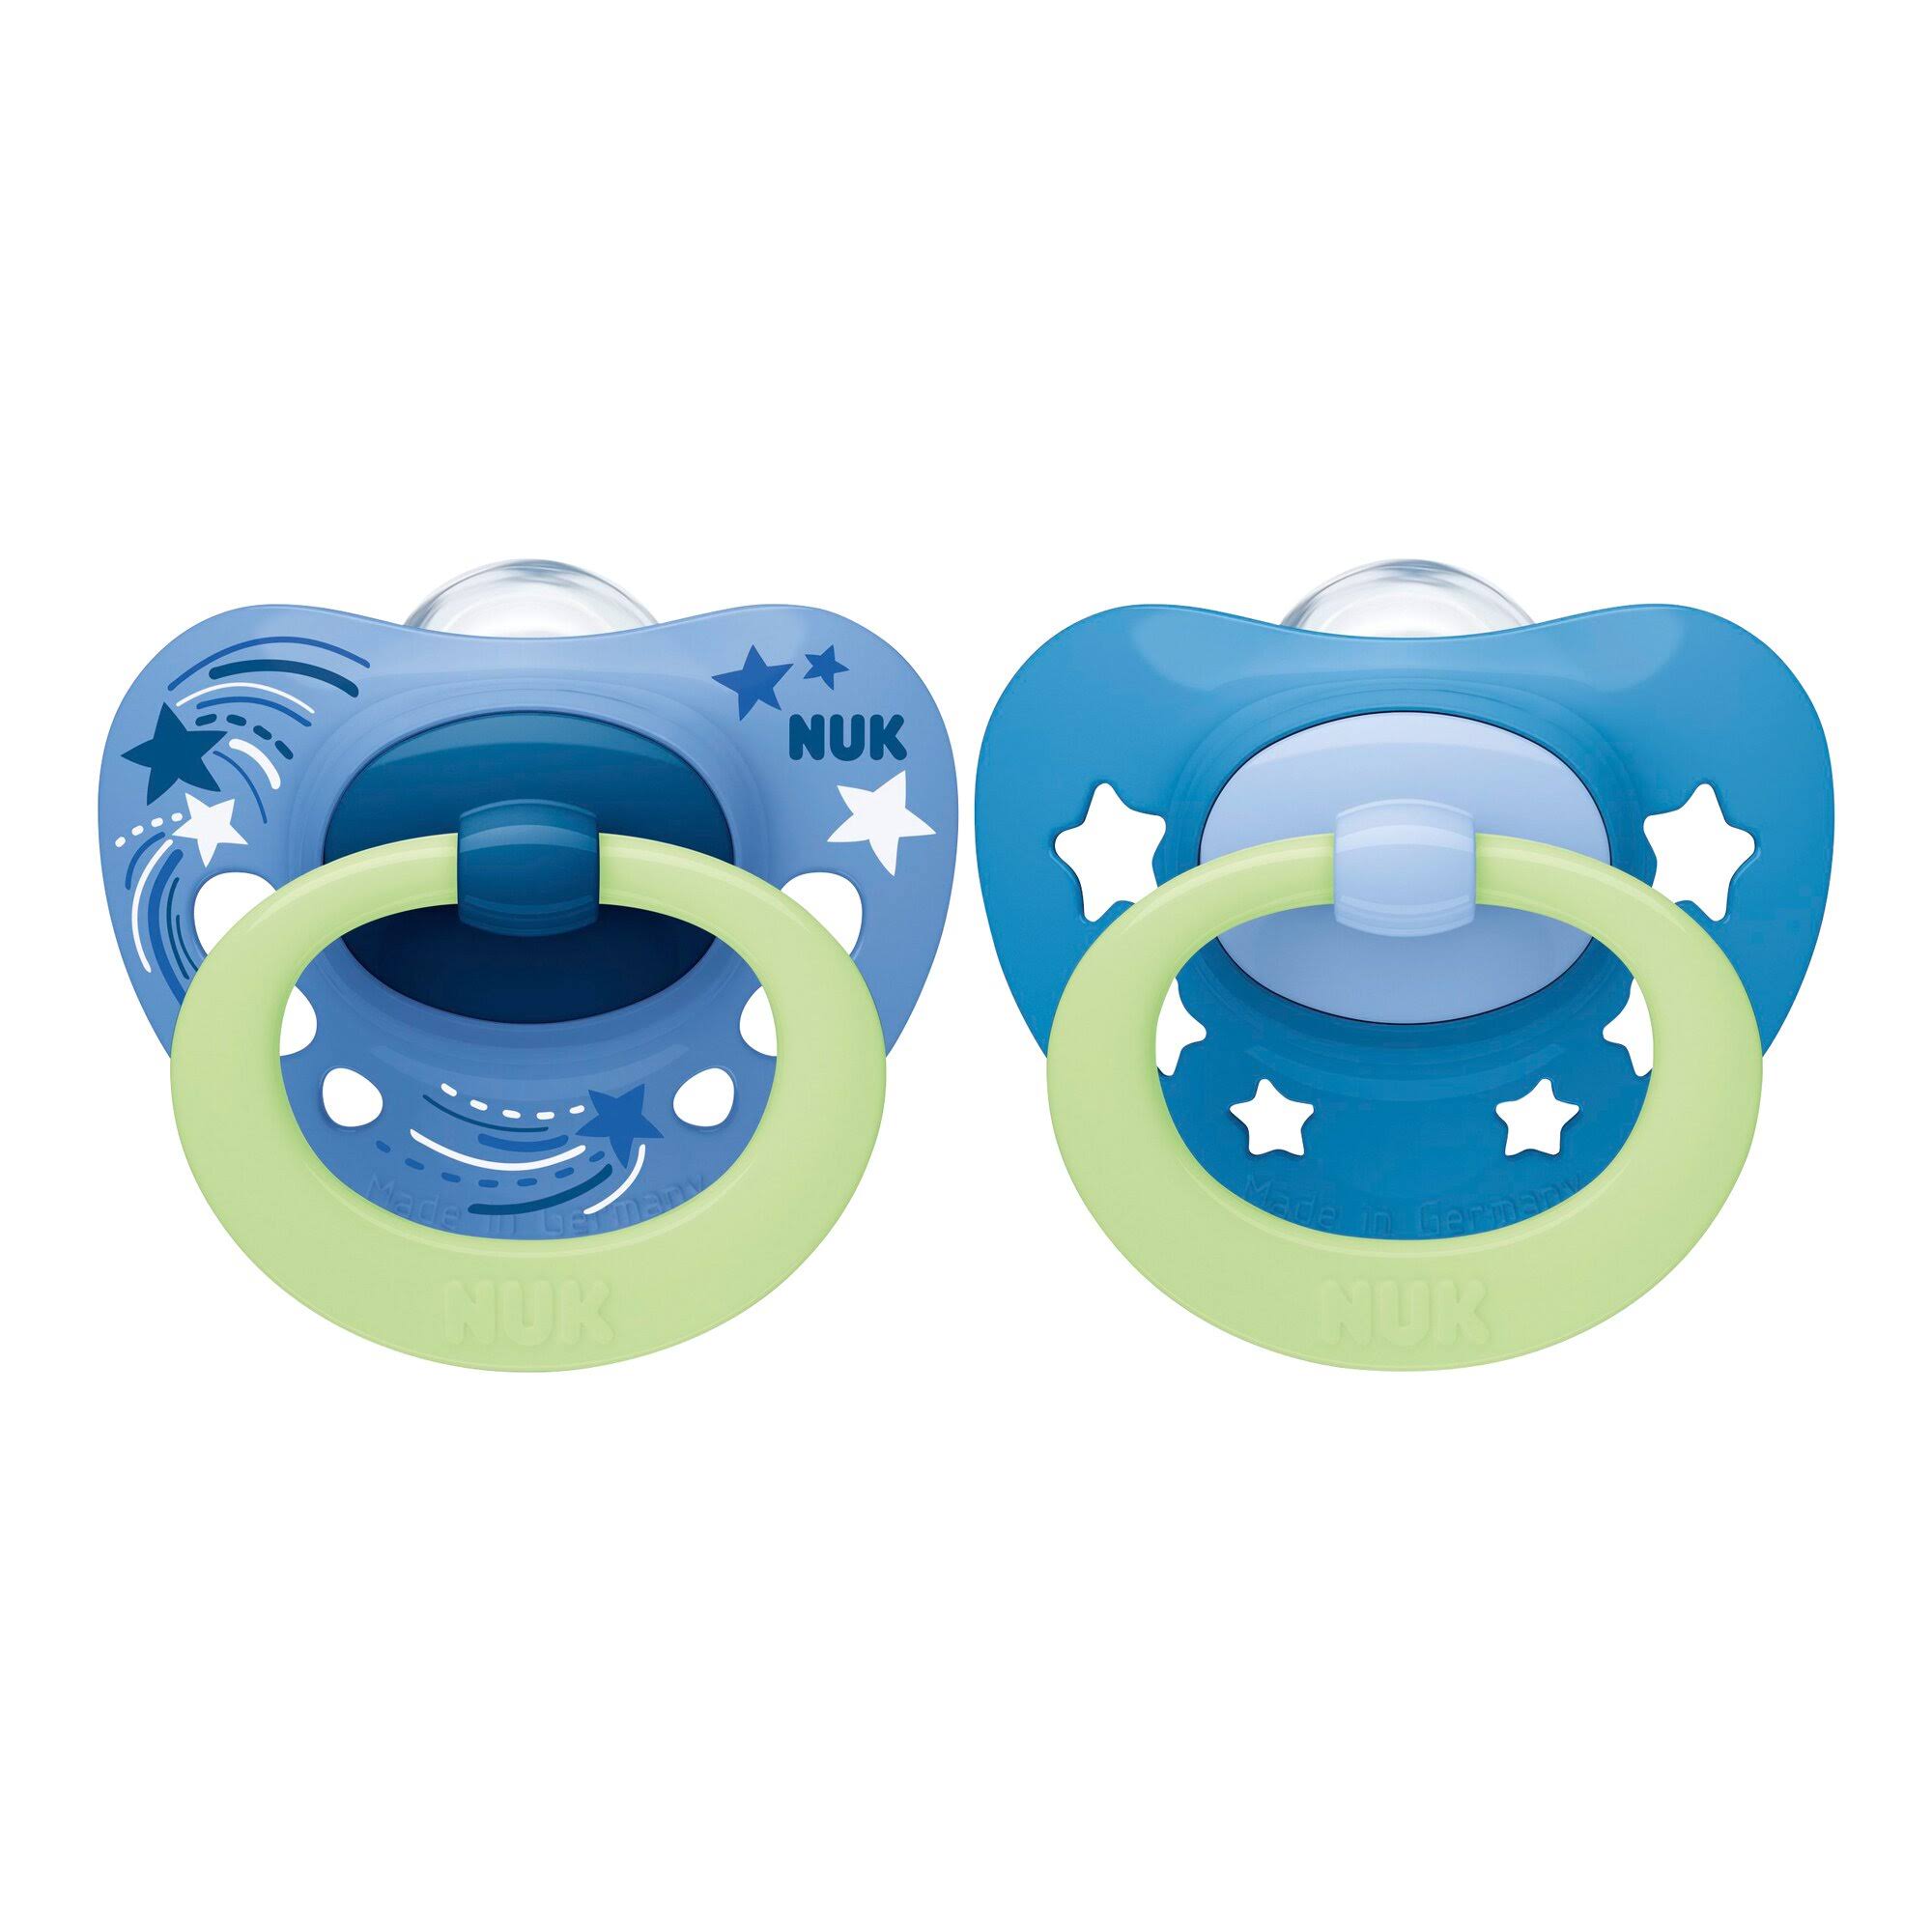 NUK Signature Night Blue Silicone Soother Size 0-6 Months 2pcs